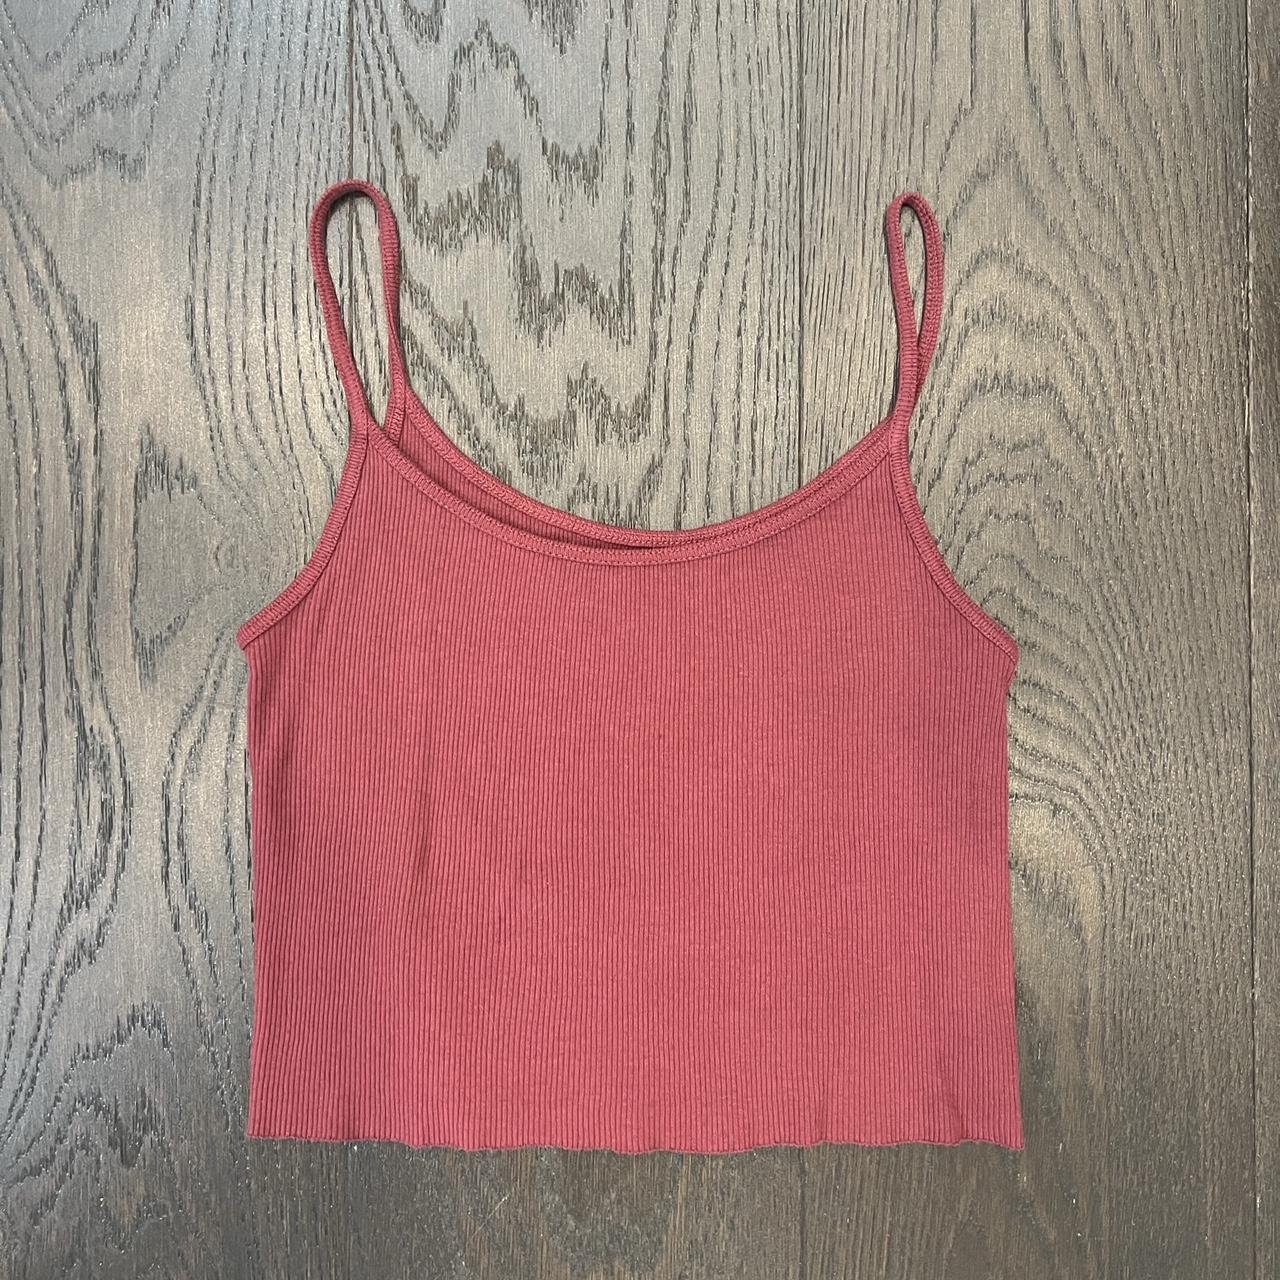 Brandy Melville Champagne Tank Tops & Camisoles